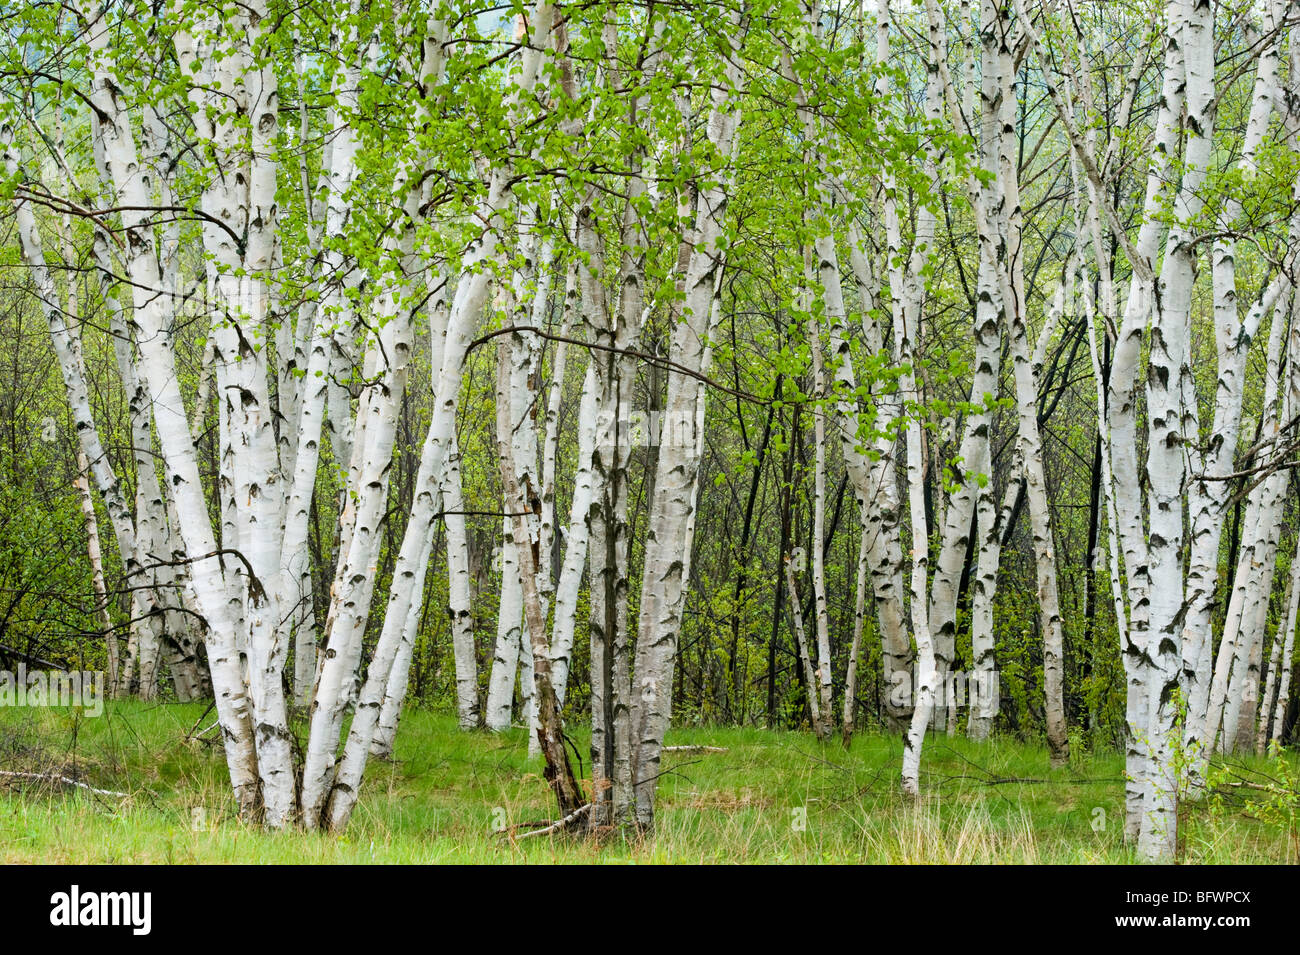 Birch trees with emerging foliage in spring, Greater Sudbury, Ontario, Canada Stock Photo